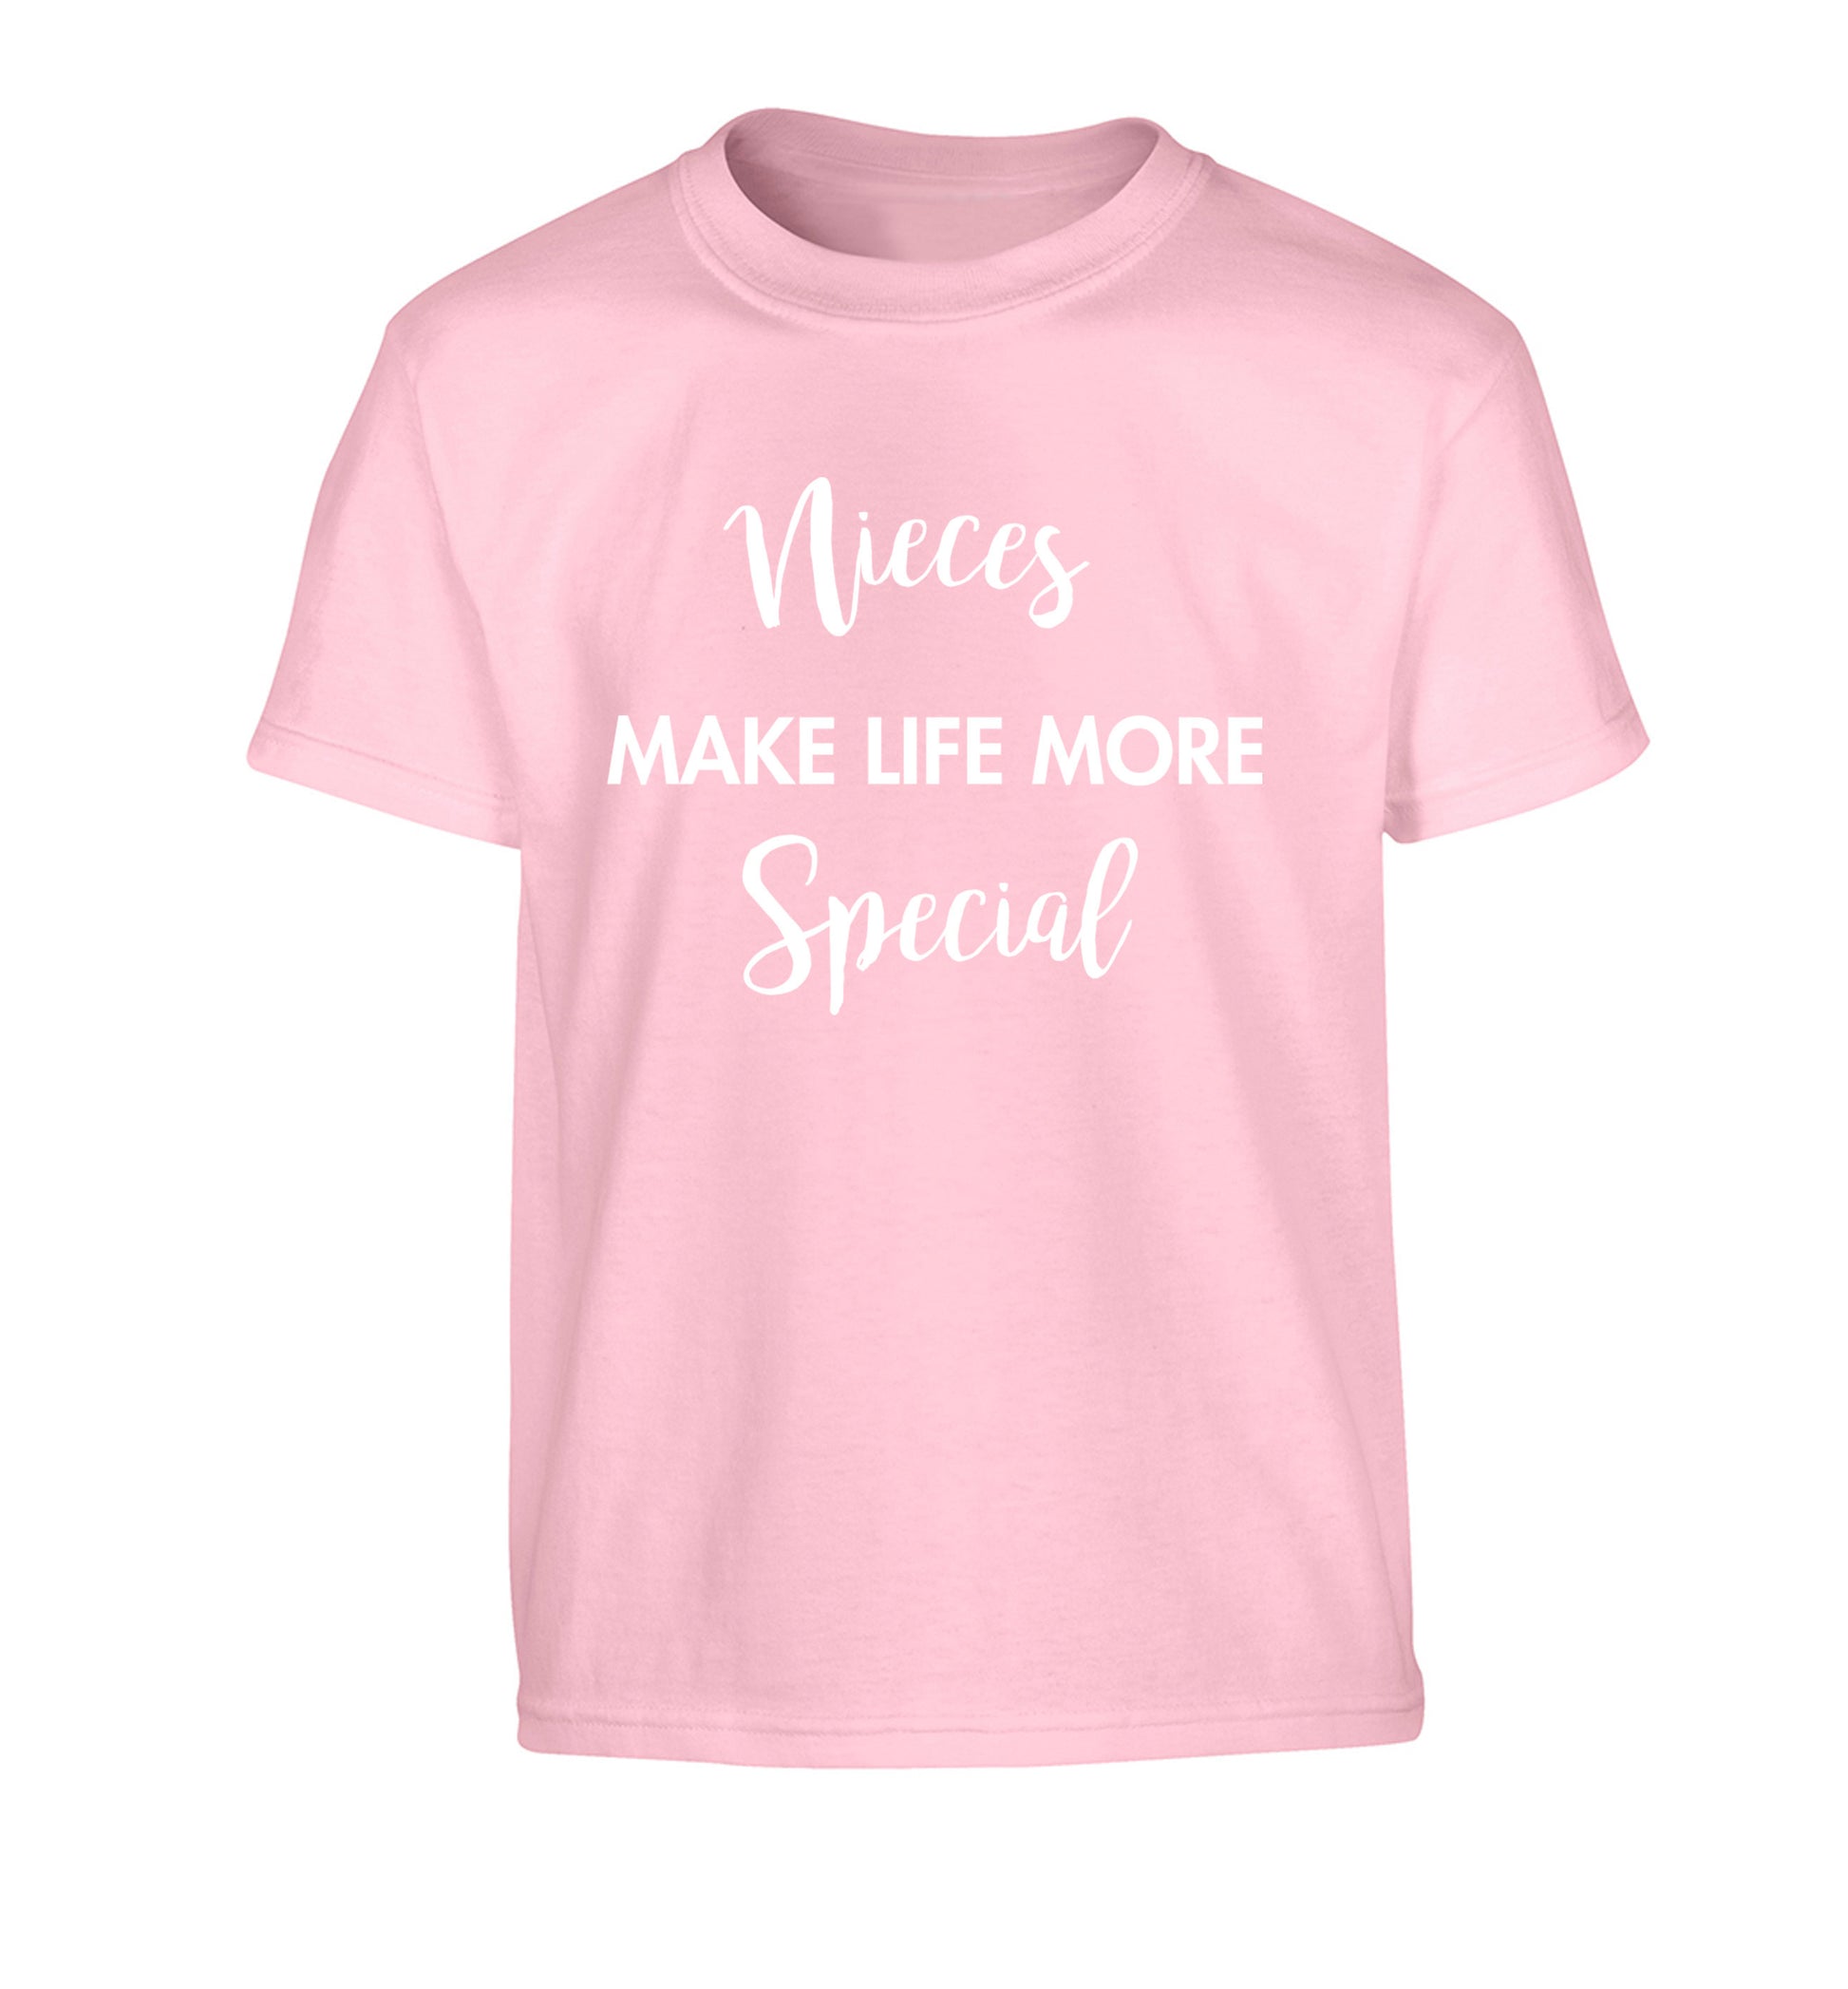 Nieces make life more special Children's light pink Tshirt 12-14 Years